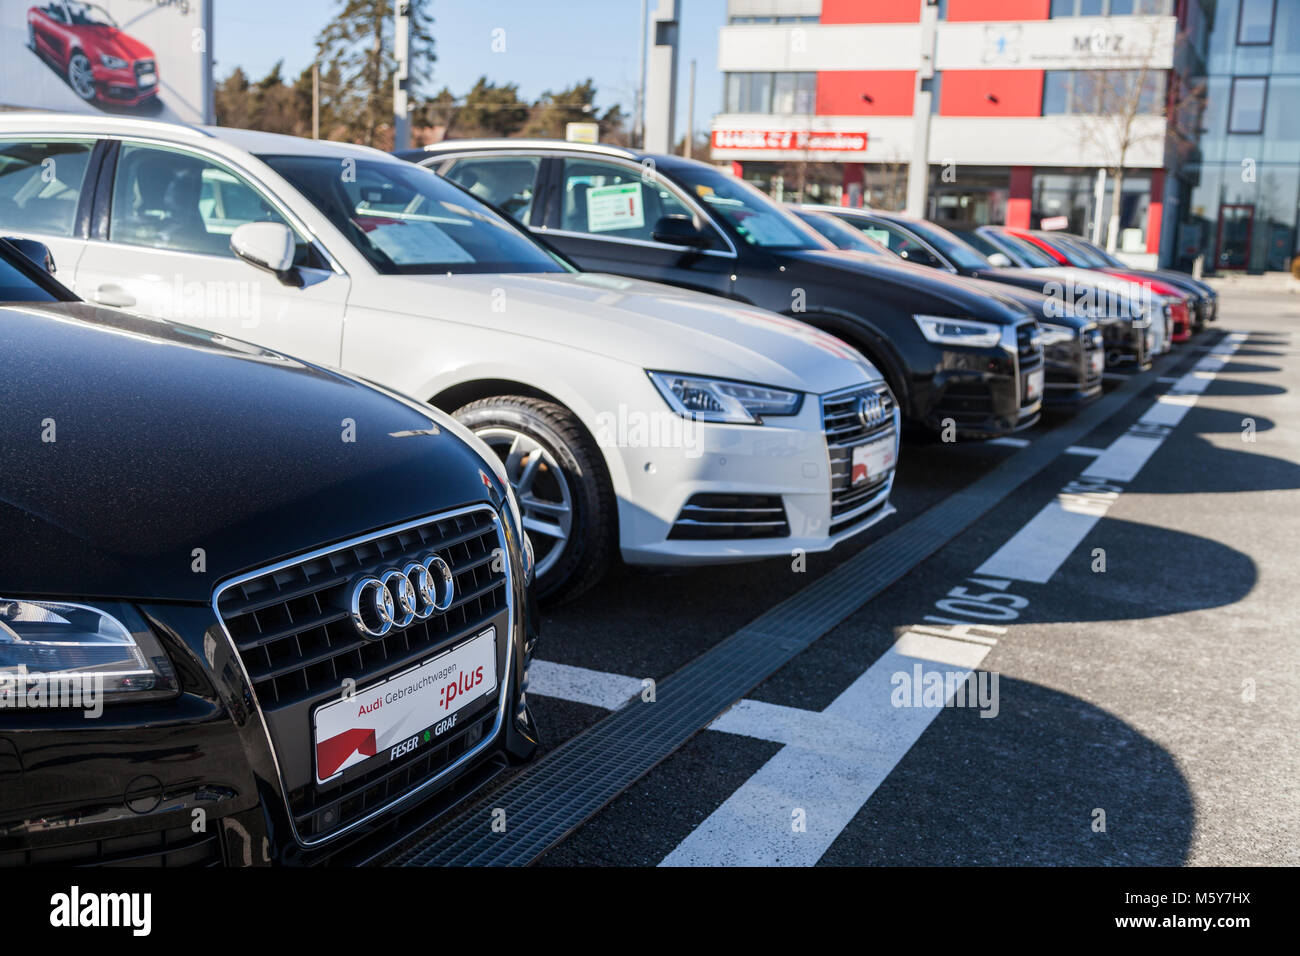 FUERTH / GERMANY - FEBRUARY 25, 2018: Audi emblem on an audi car. Audi AG is a German automobile manufacturer that designs, engineers, produces, marke Stock Photo